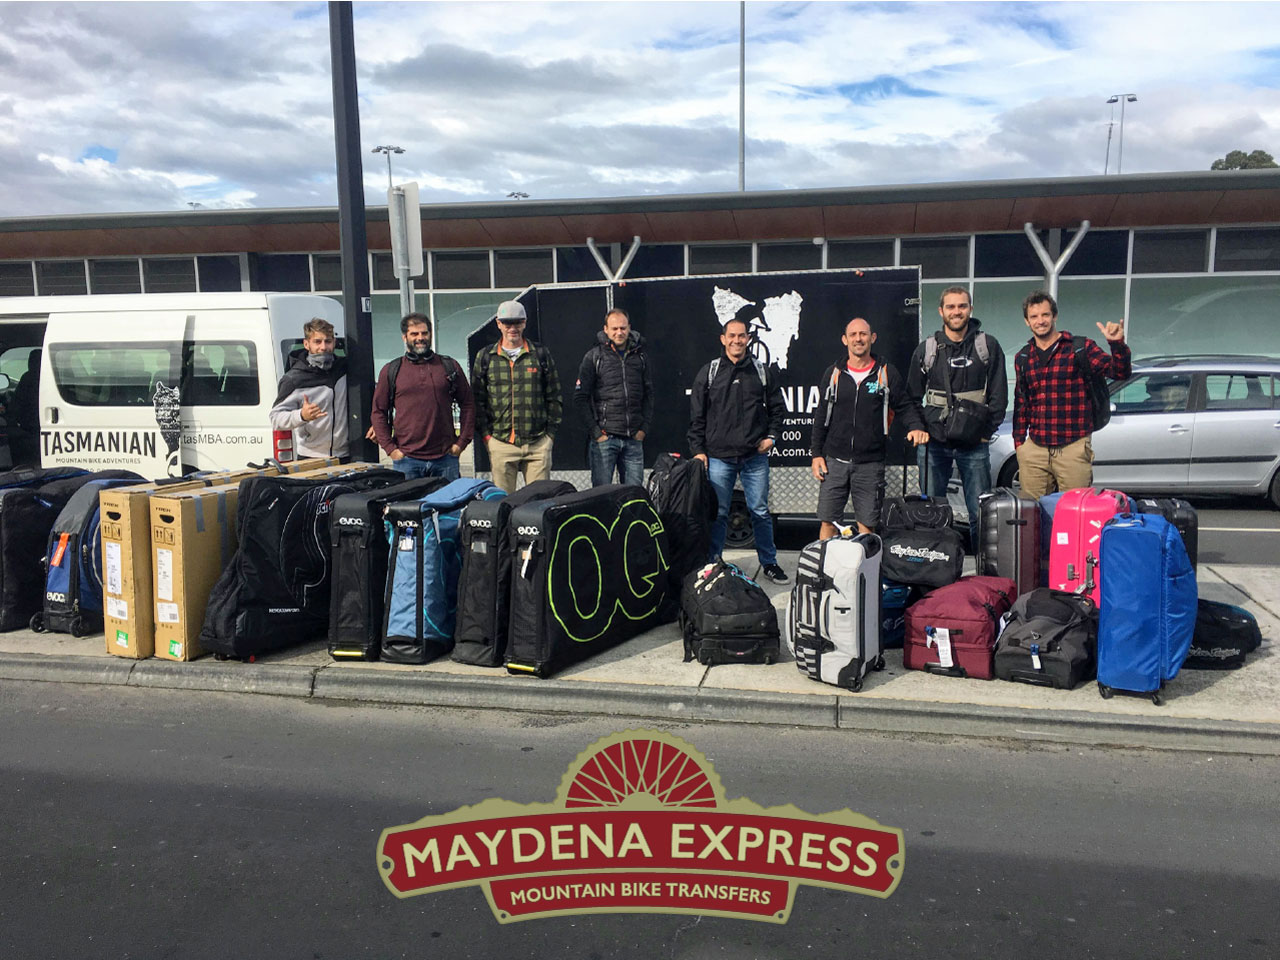 Maydena Express - Private group transfer from Maydena Bike Park to Hobart Airport